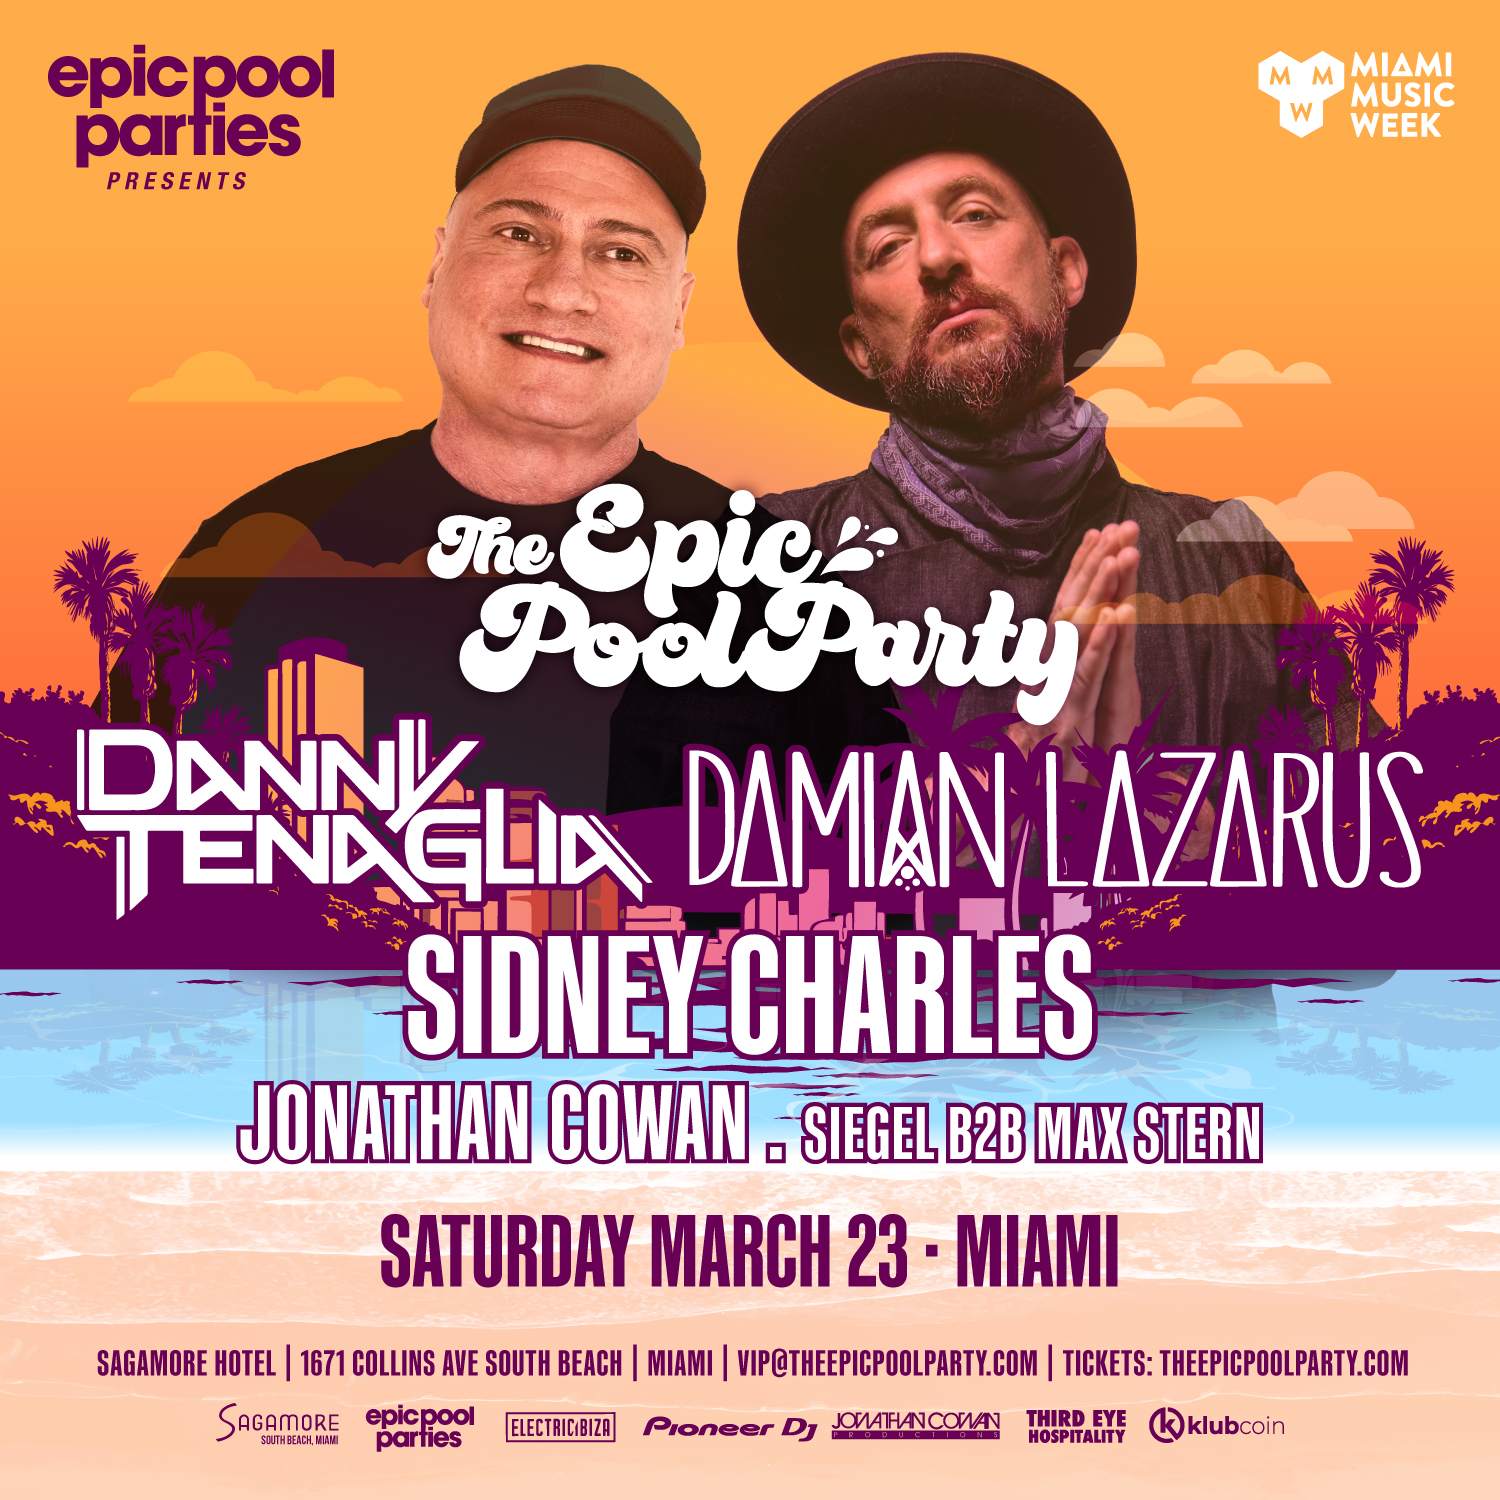 EPIC POOL PARTIES - DAY 4 - Danny Tenaglia - Damian Lazarus (Extended Sets) - Página frontal